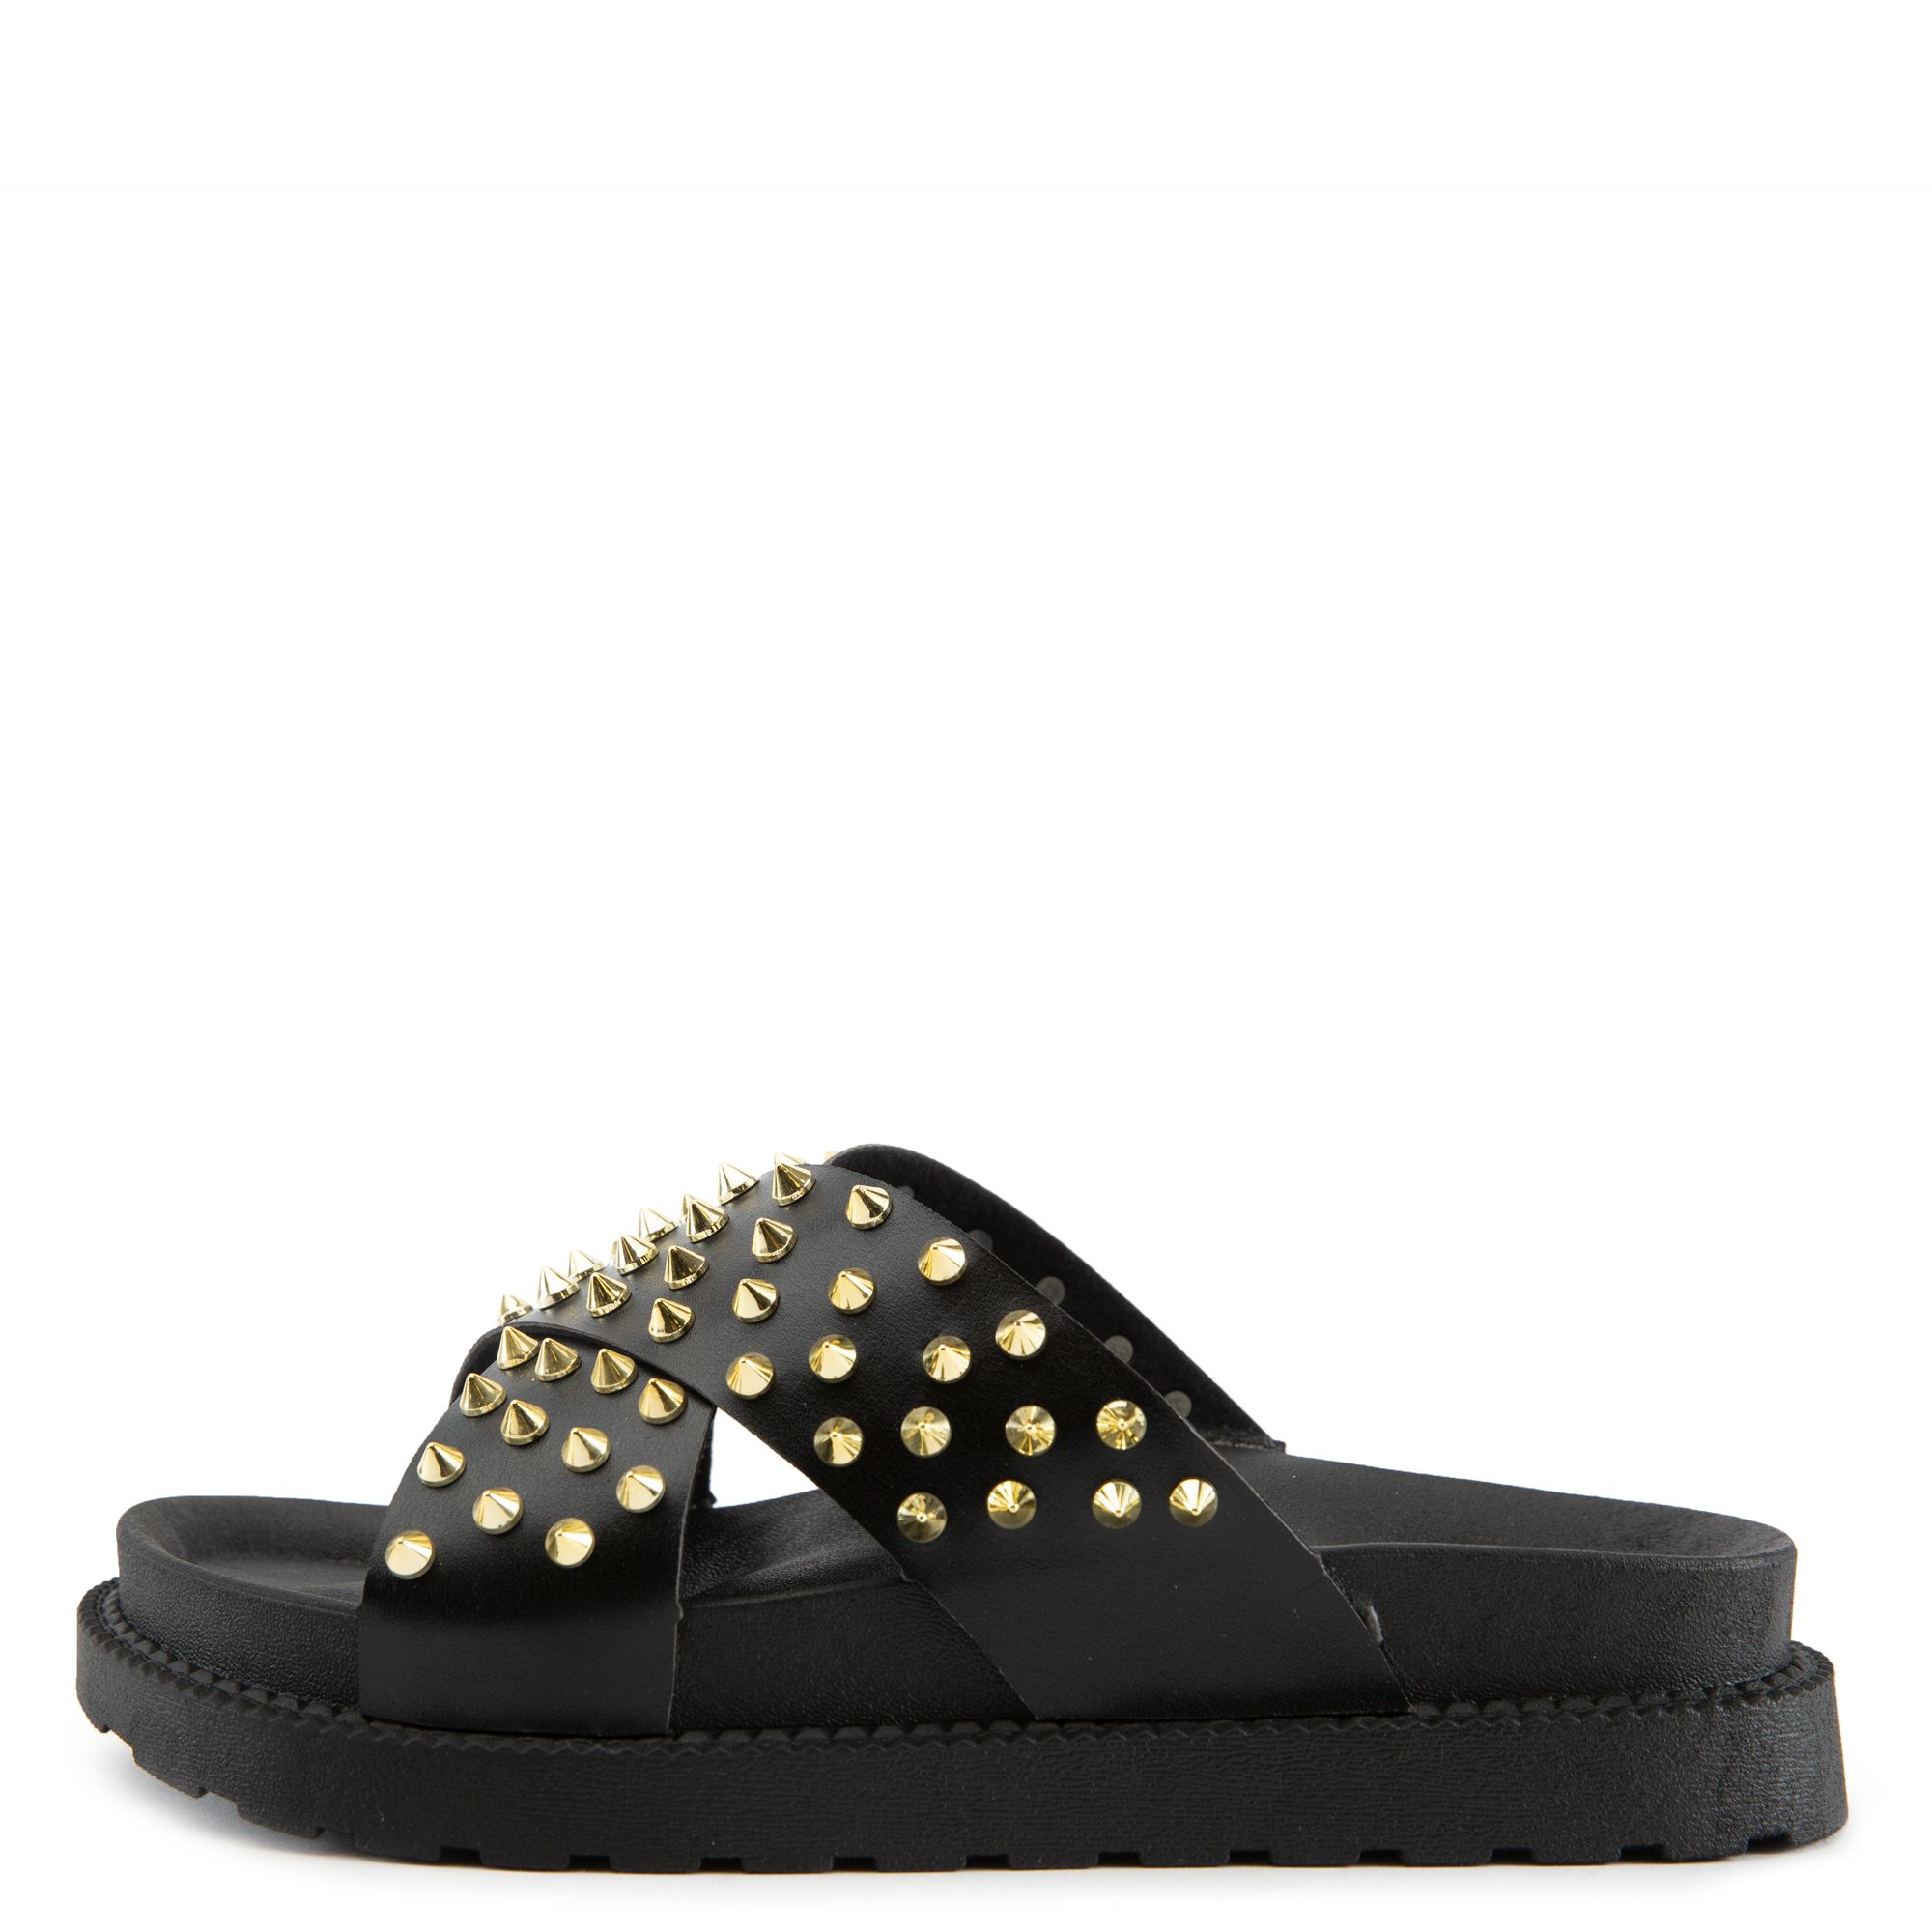 LILIANA Airy-1 Spiked Upper Sandals AIRY-1-BLK - Shiekh